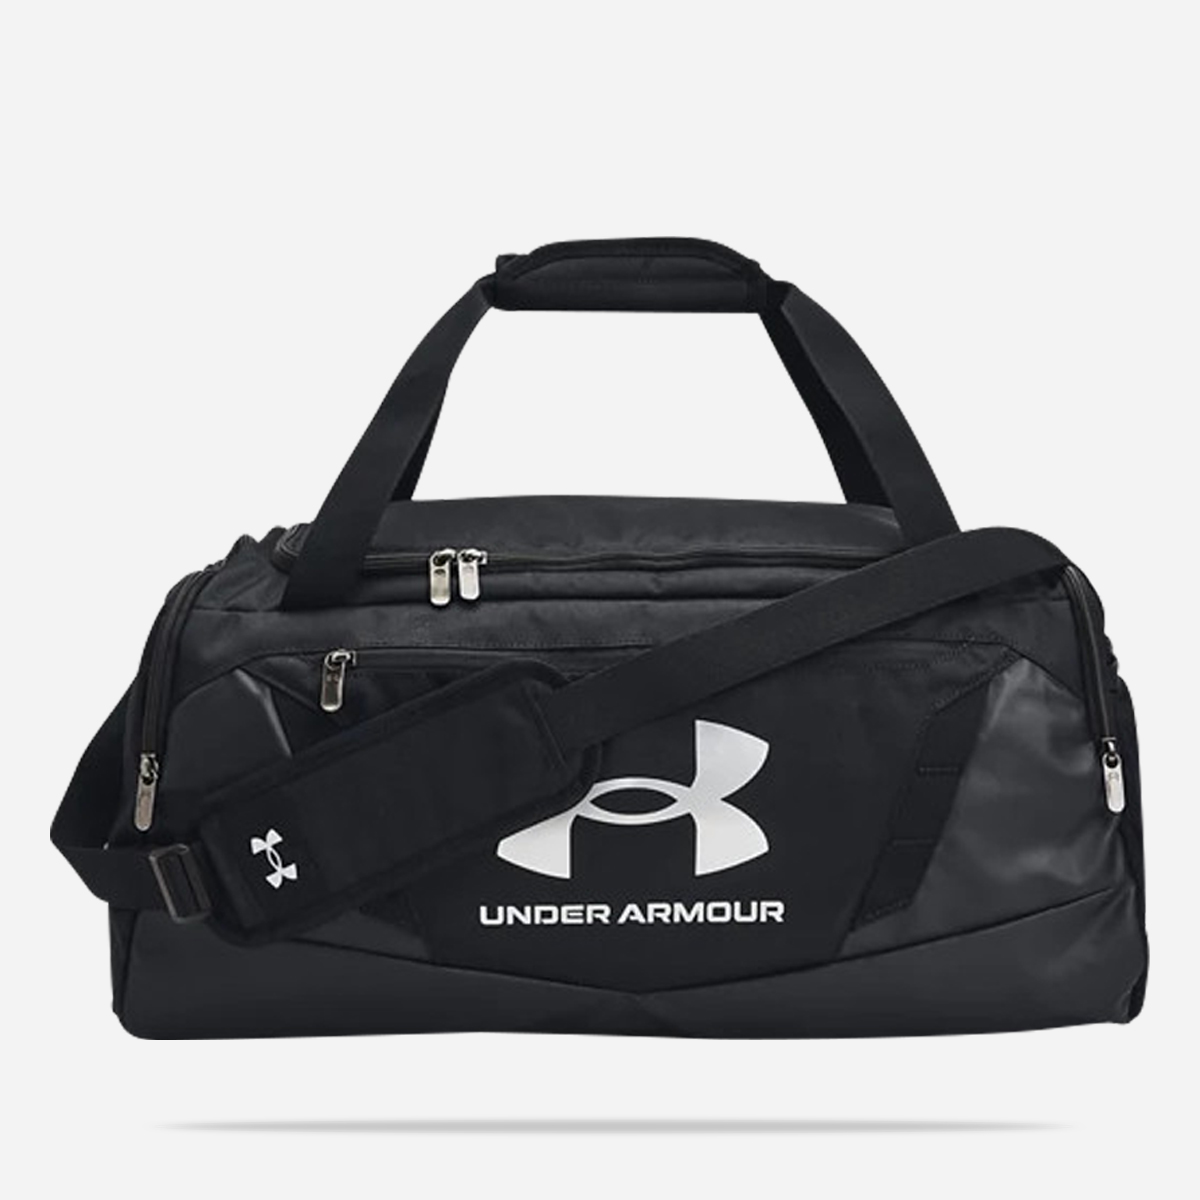 AN280623 Undeniable 5.0 Duffle Sm